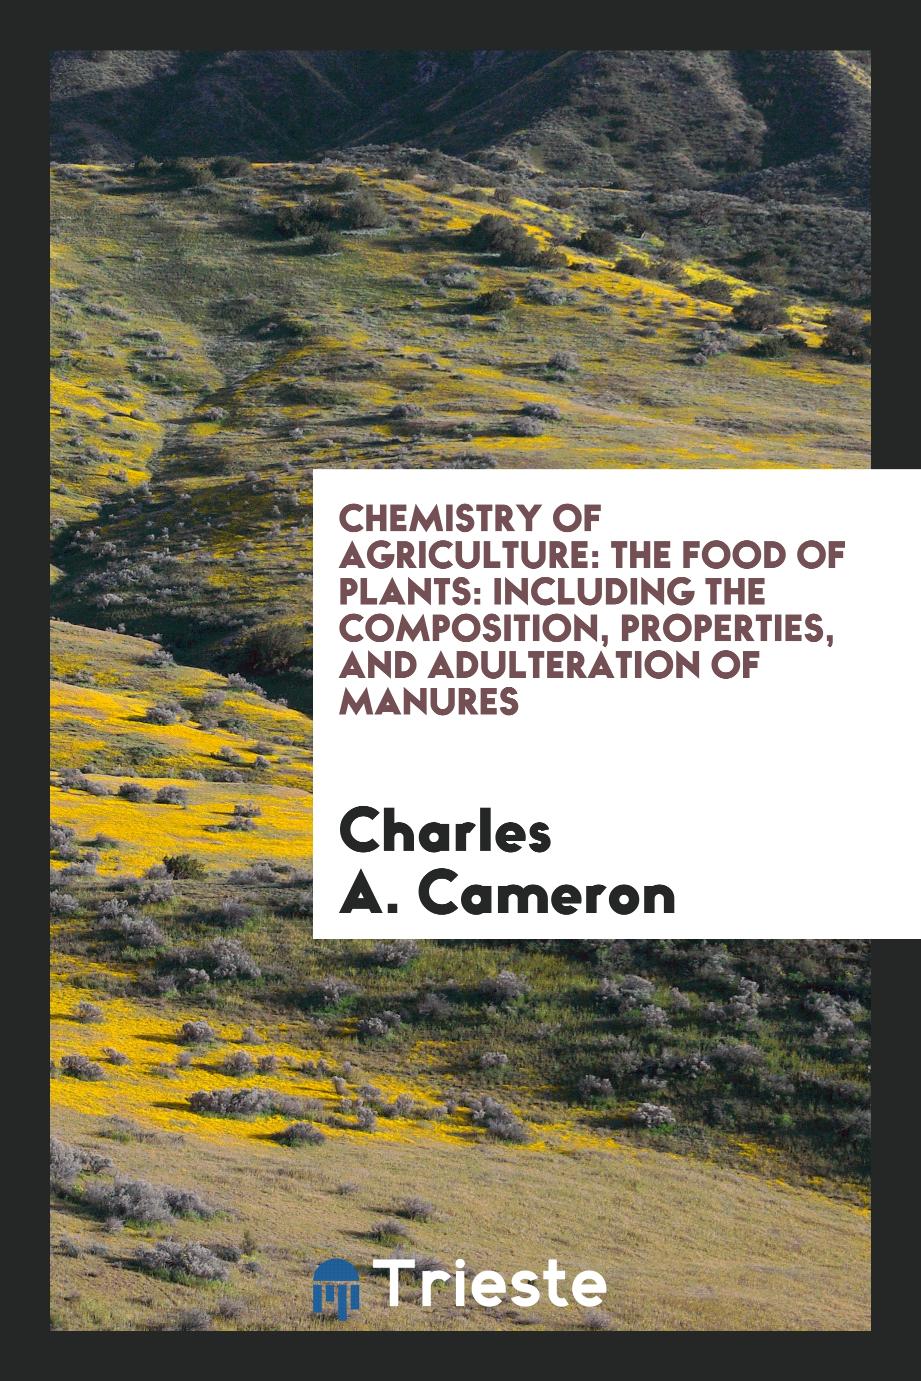 Chemistry of Agriculture: The Food of Plants: Including the Composition, Properties, and Adulteration of Manures